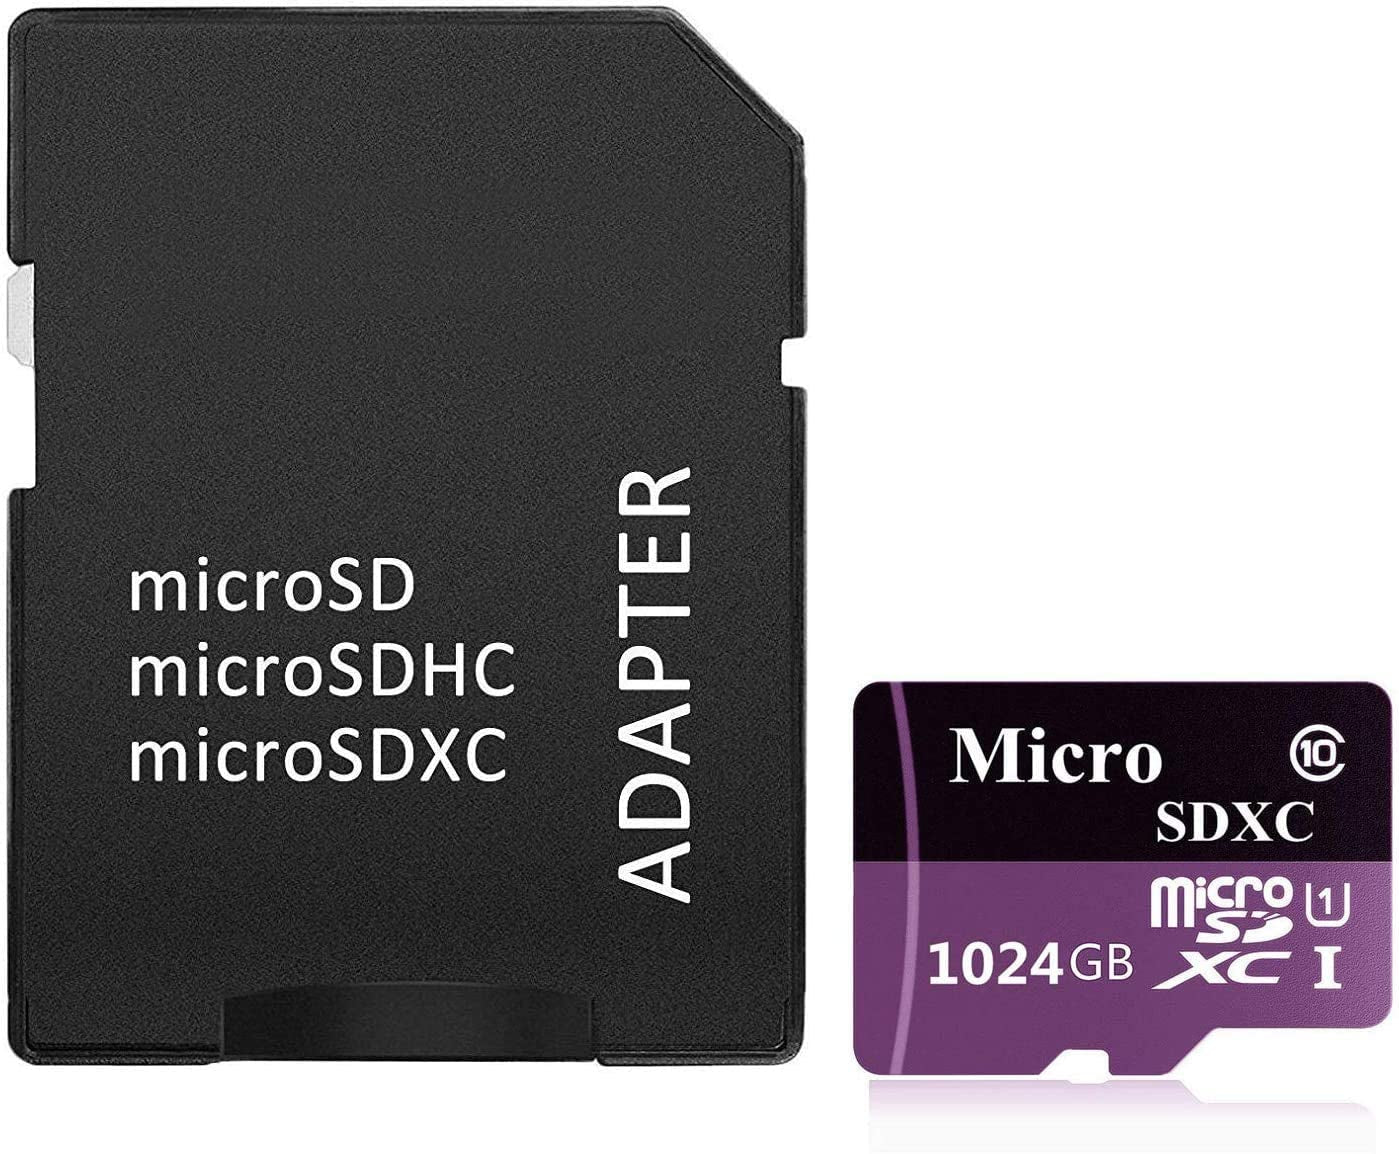 1024GB microSDXC Class 10 Memory Card for Smartphones and Tablets